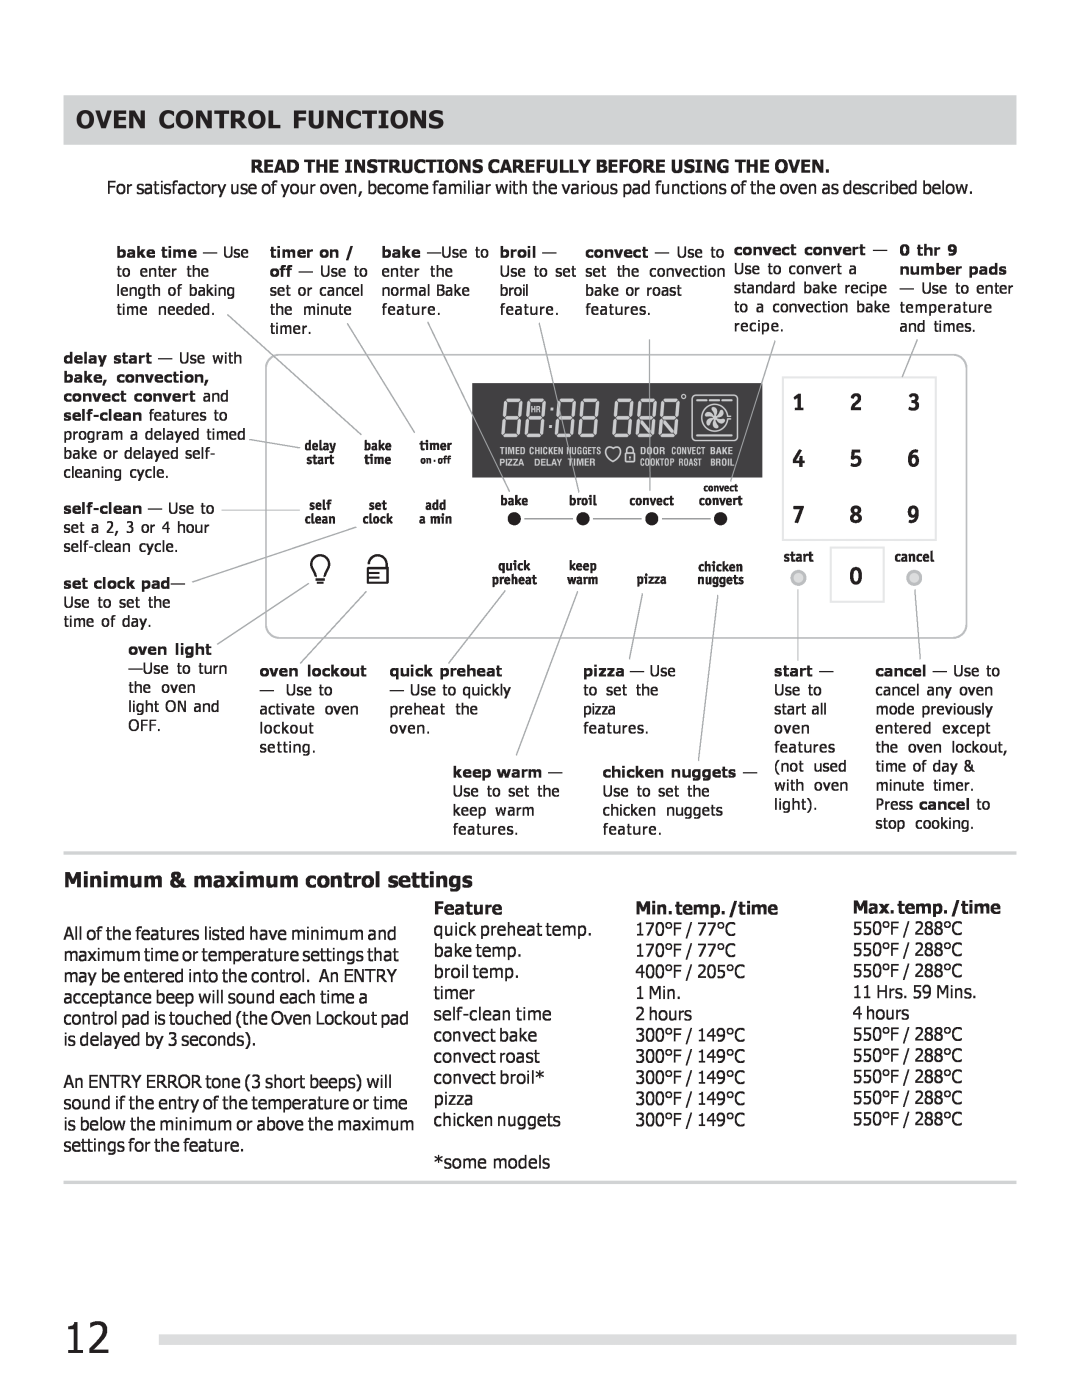 Frigidaire 316901300, CGGF3054KF important safety instructions Oven Control Functions, Minimum & maximum control settings 